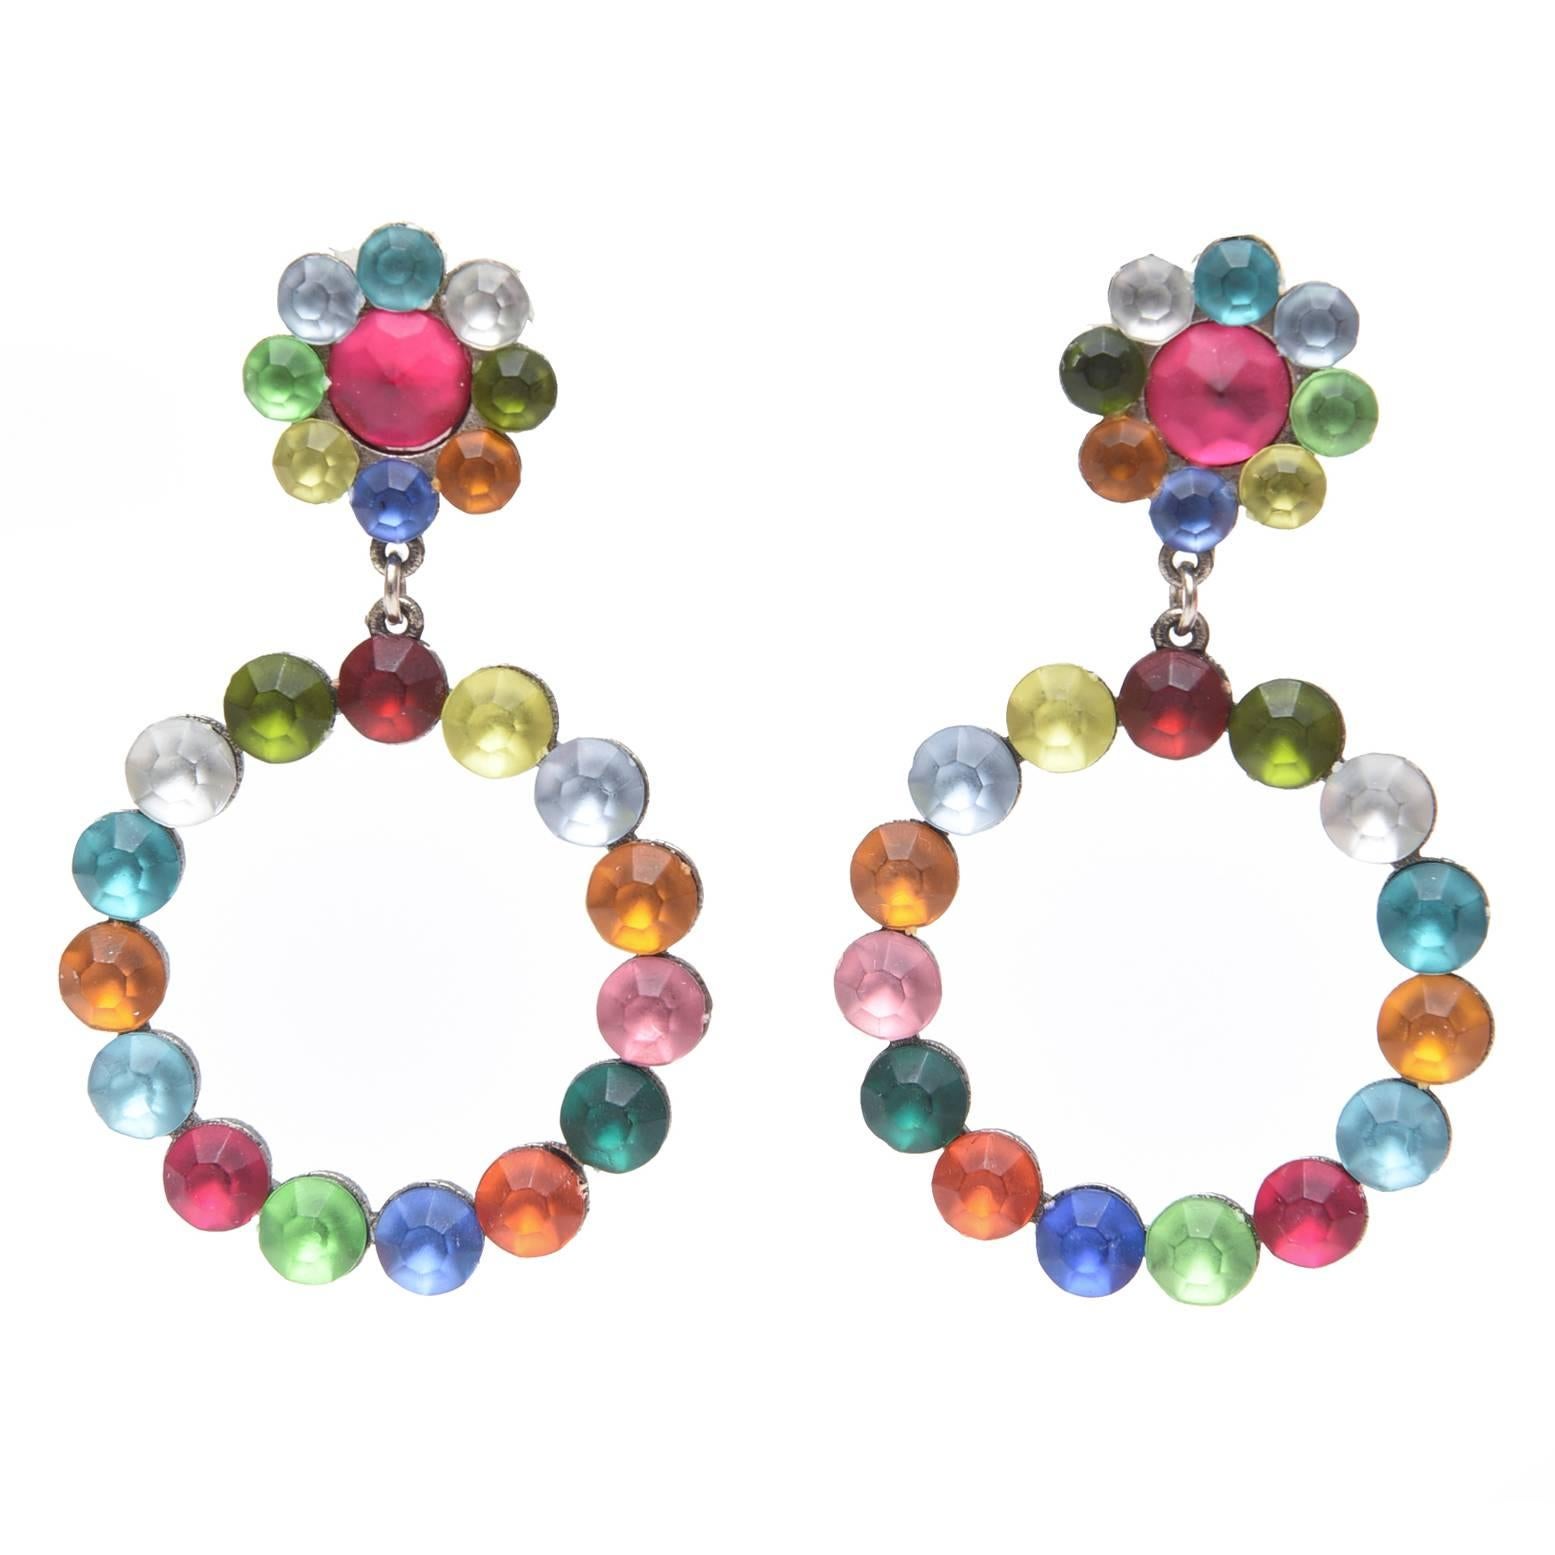 Pair of Colorful Resin Circle Dangle Vintage Clip On Earrings